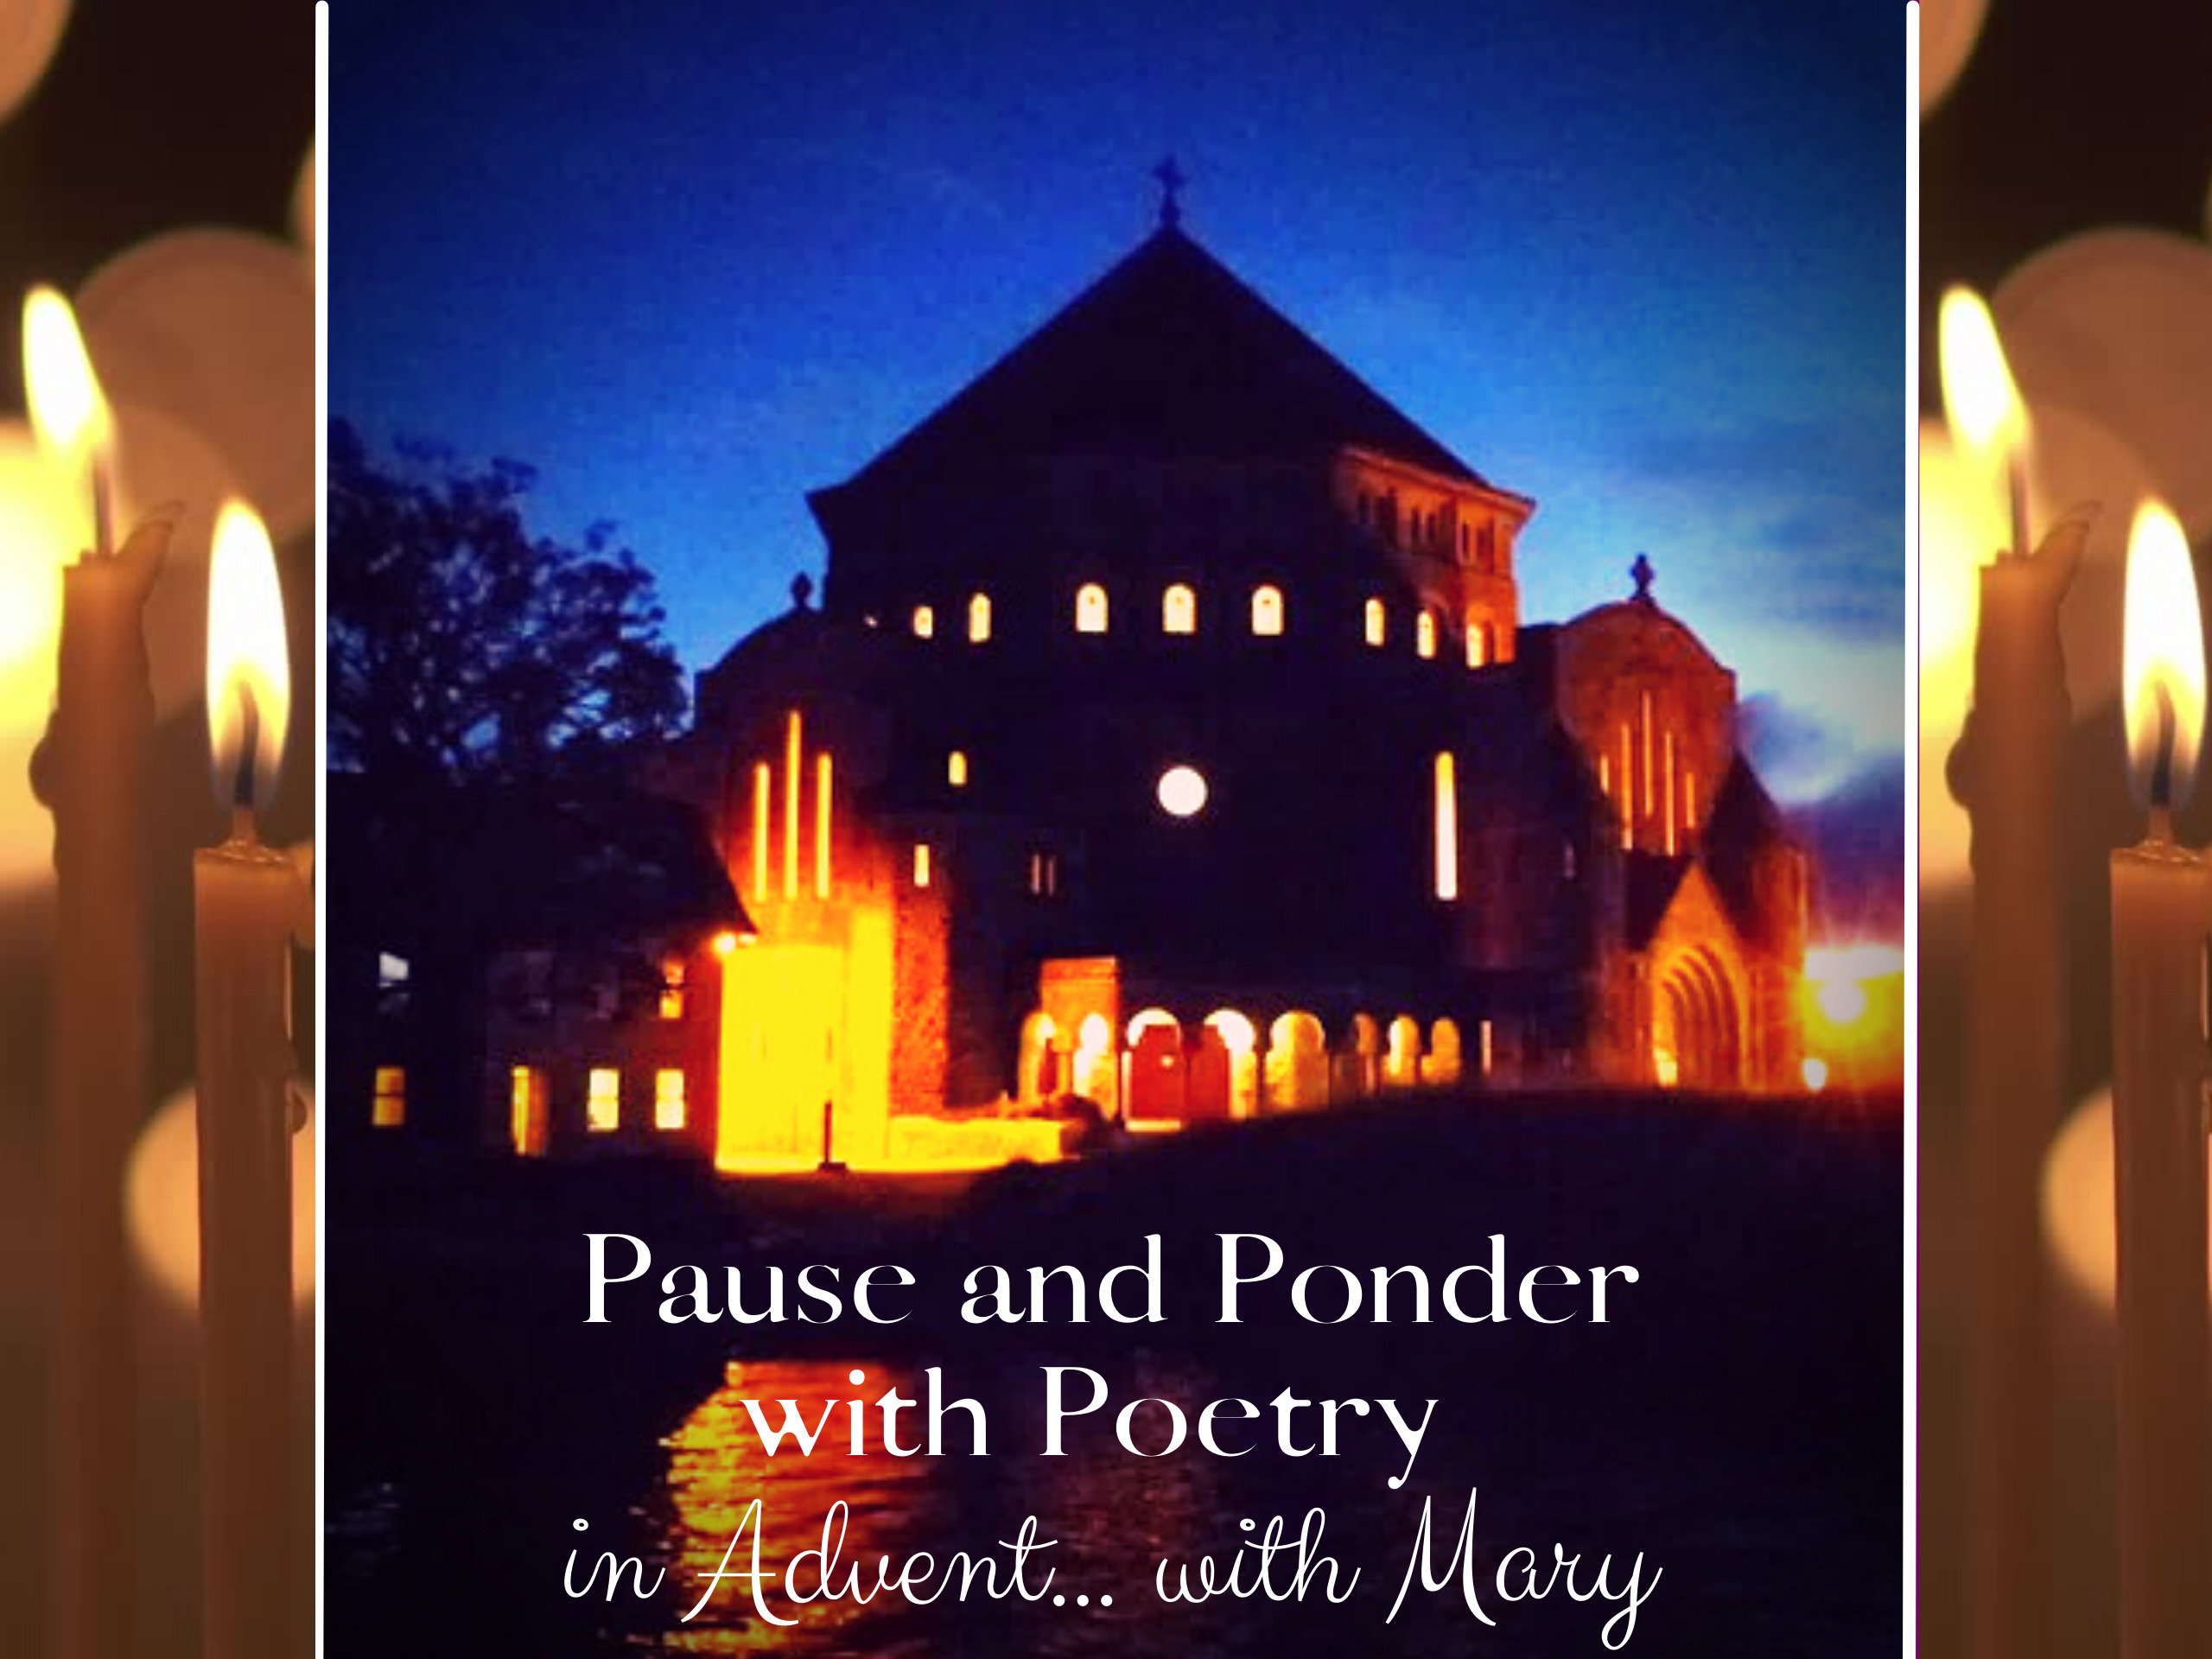 Pause and Ponder Advent series